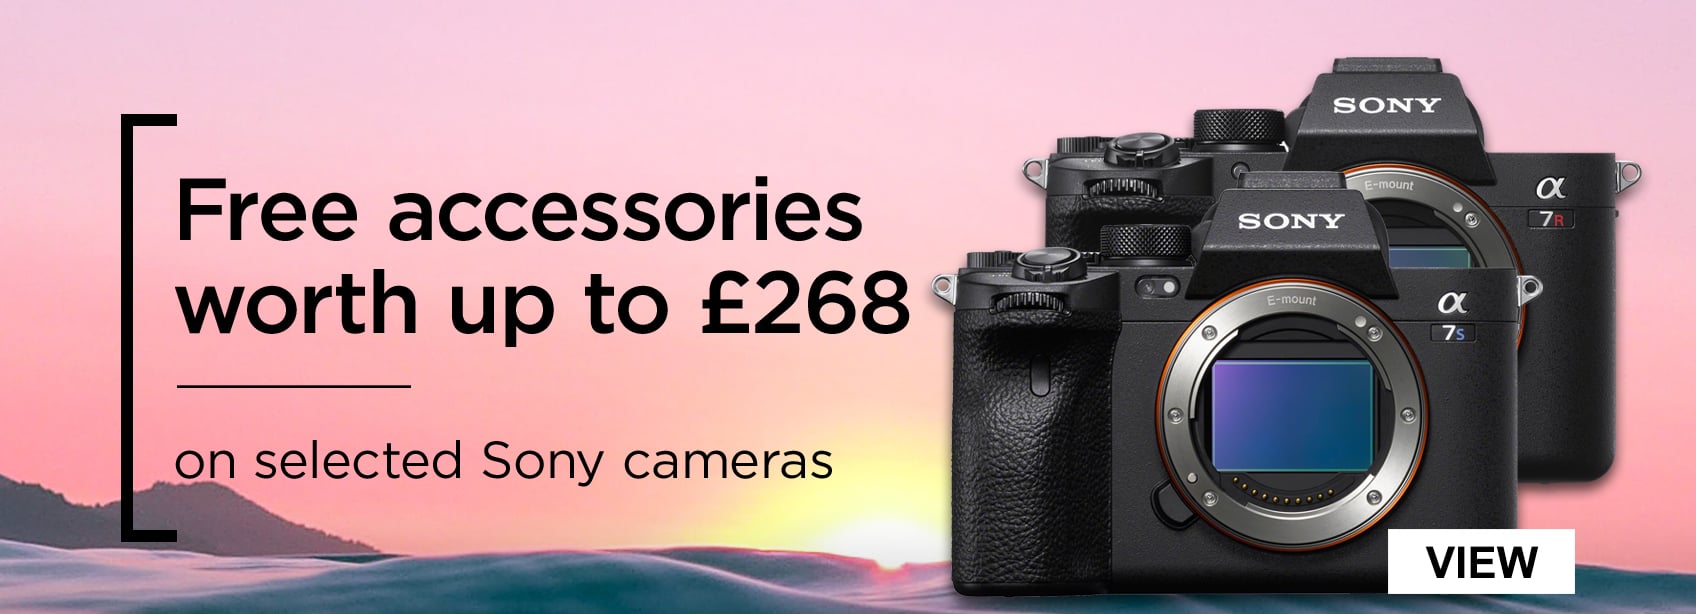 Free accessories worth up to £268 on selected Sony cameras